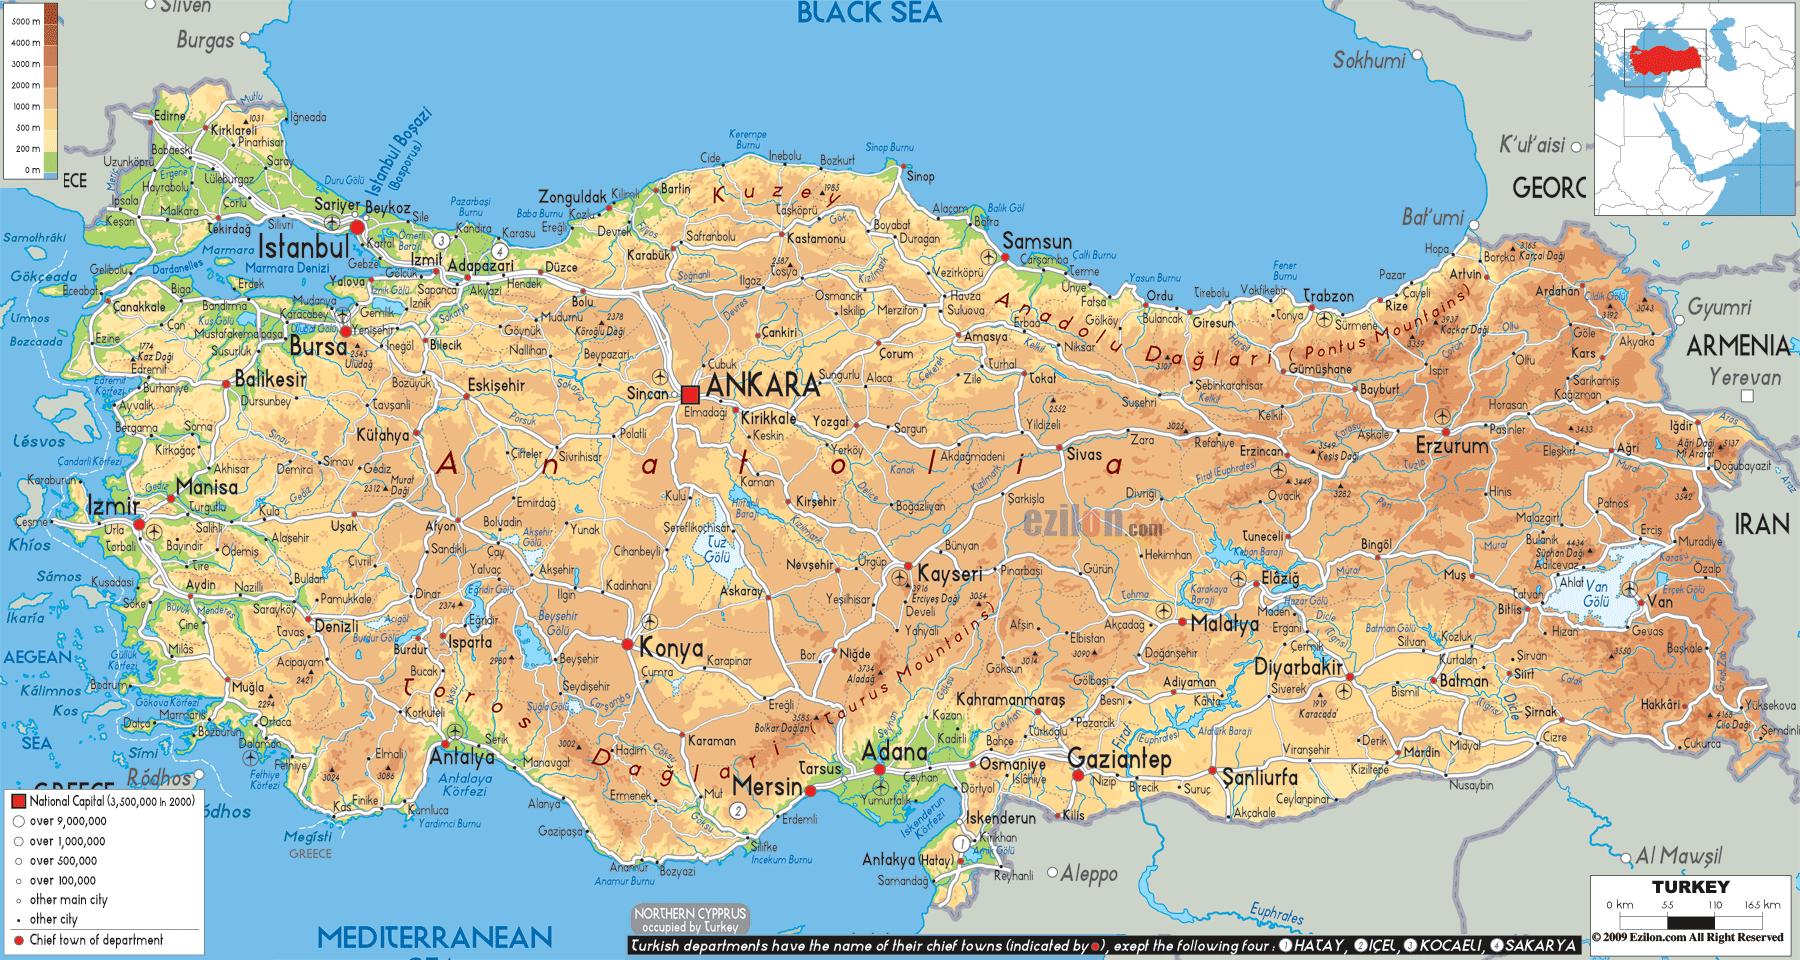 Geographical map of Turkey: topography and physical features of Turkey